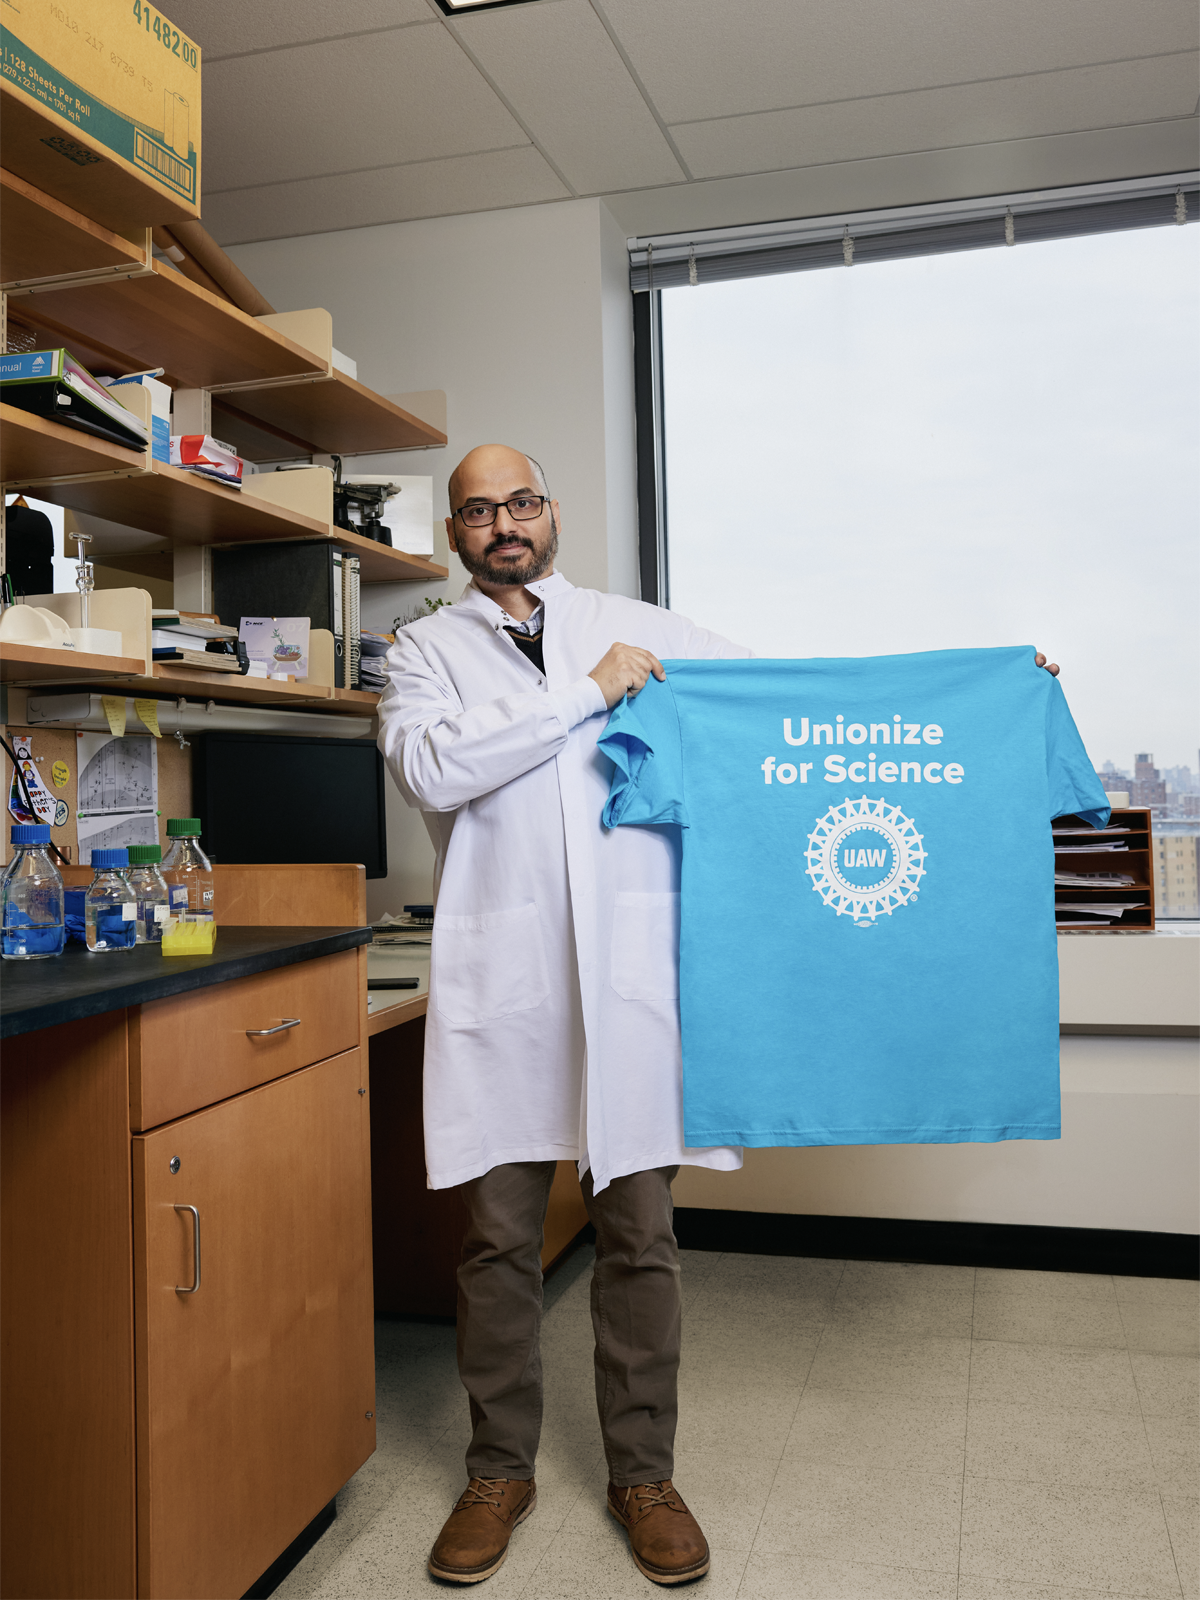 Balagopal Pai stands in a lab wearing a white coat and holding up a light blue t-shirt that says Unionize for Science above a United Auto Workers logo.